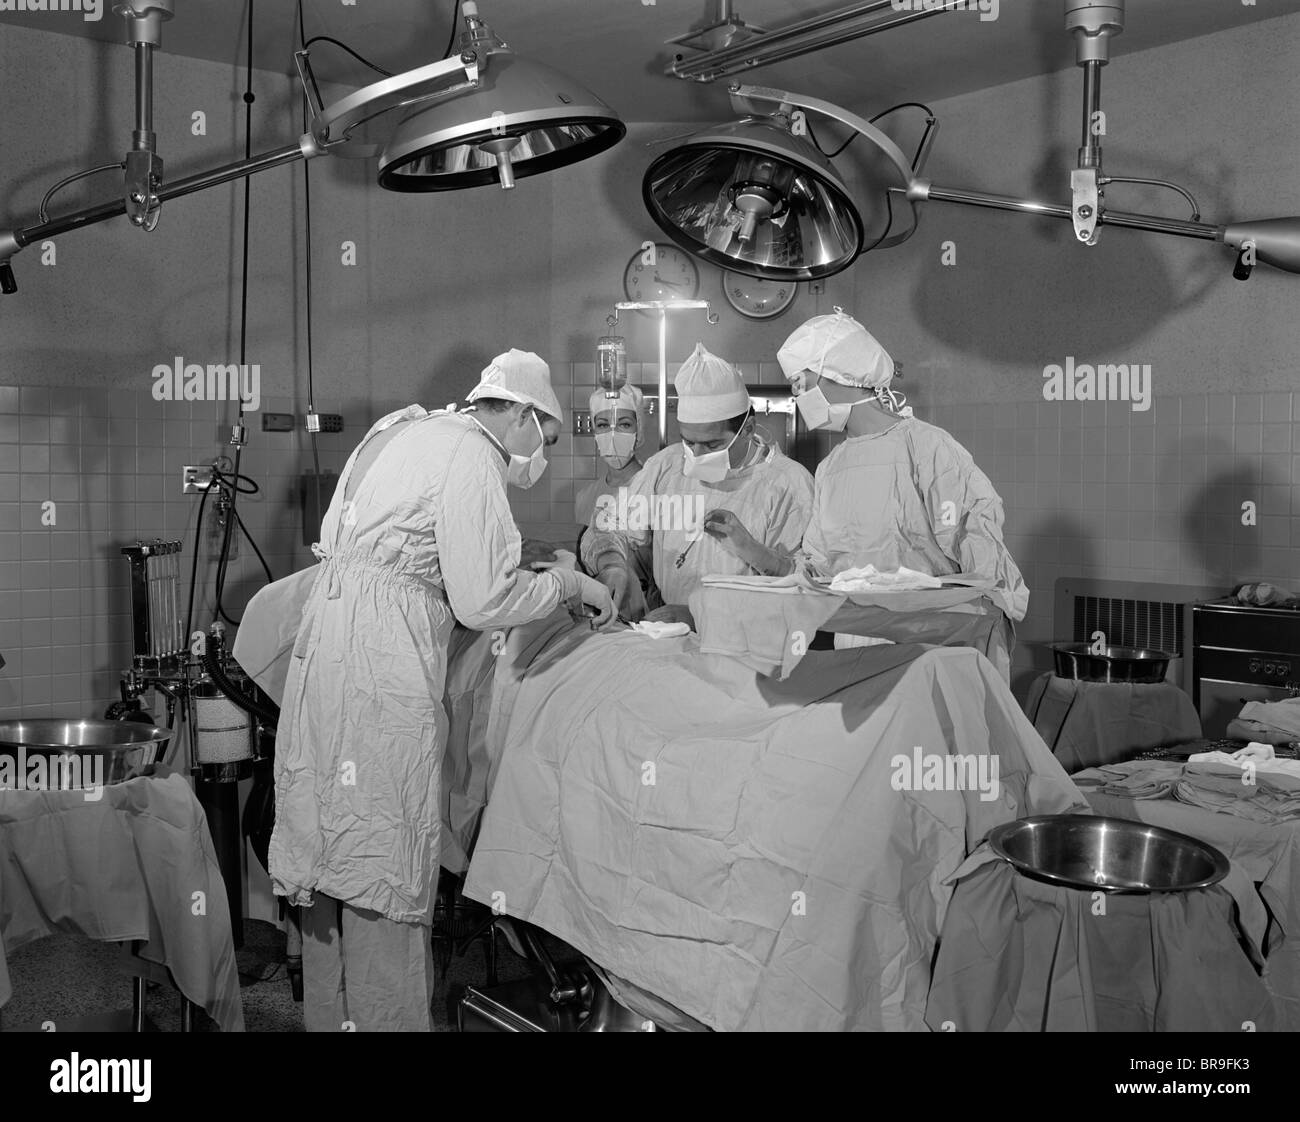 DOCTORS IN OPERATING ROOM OPERATING ON PATIENT Stock Photo